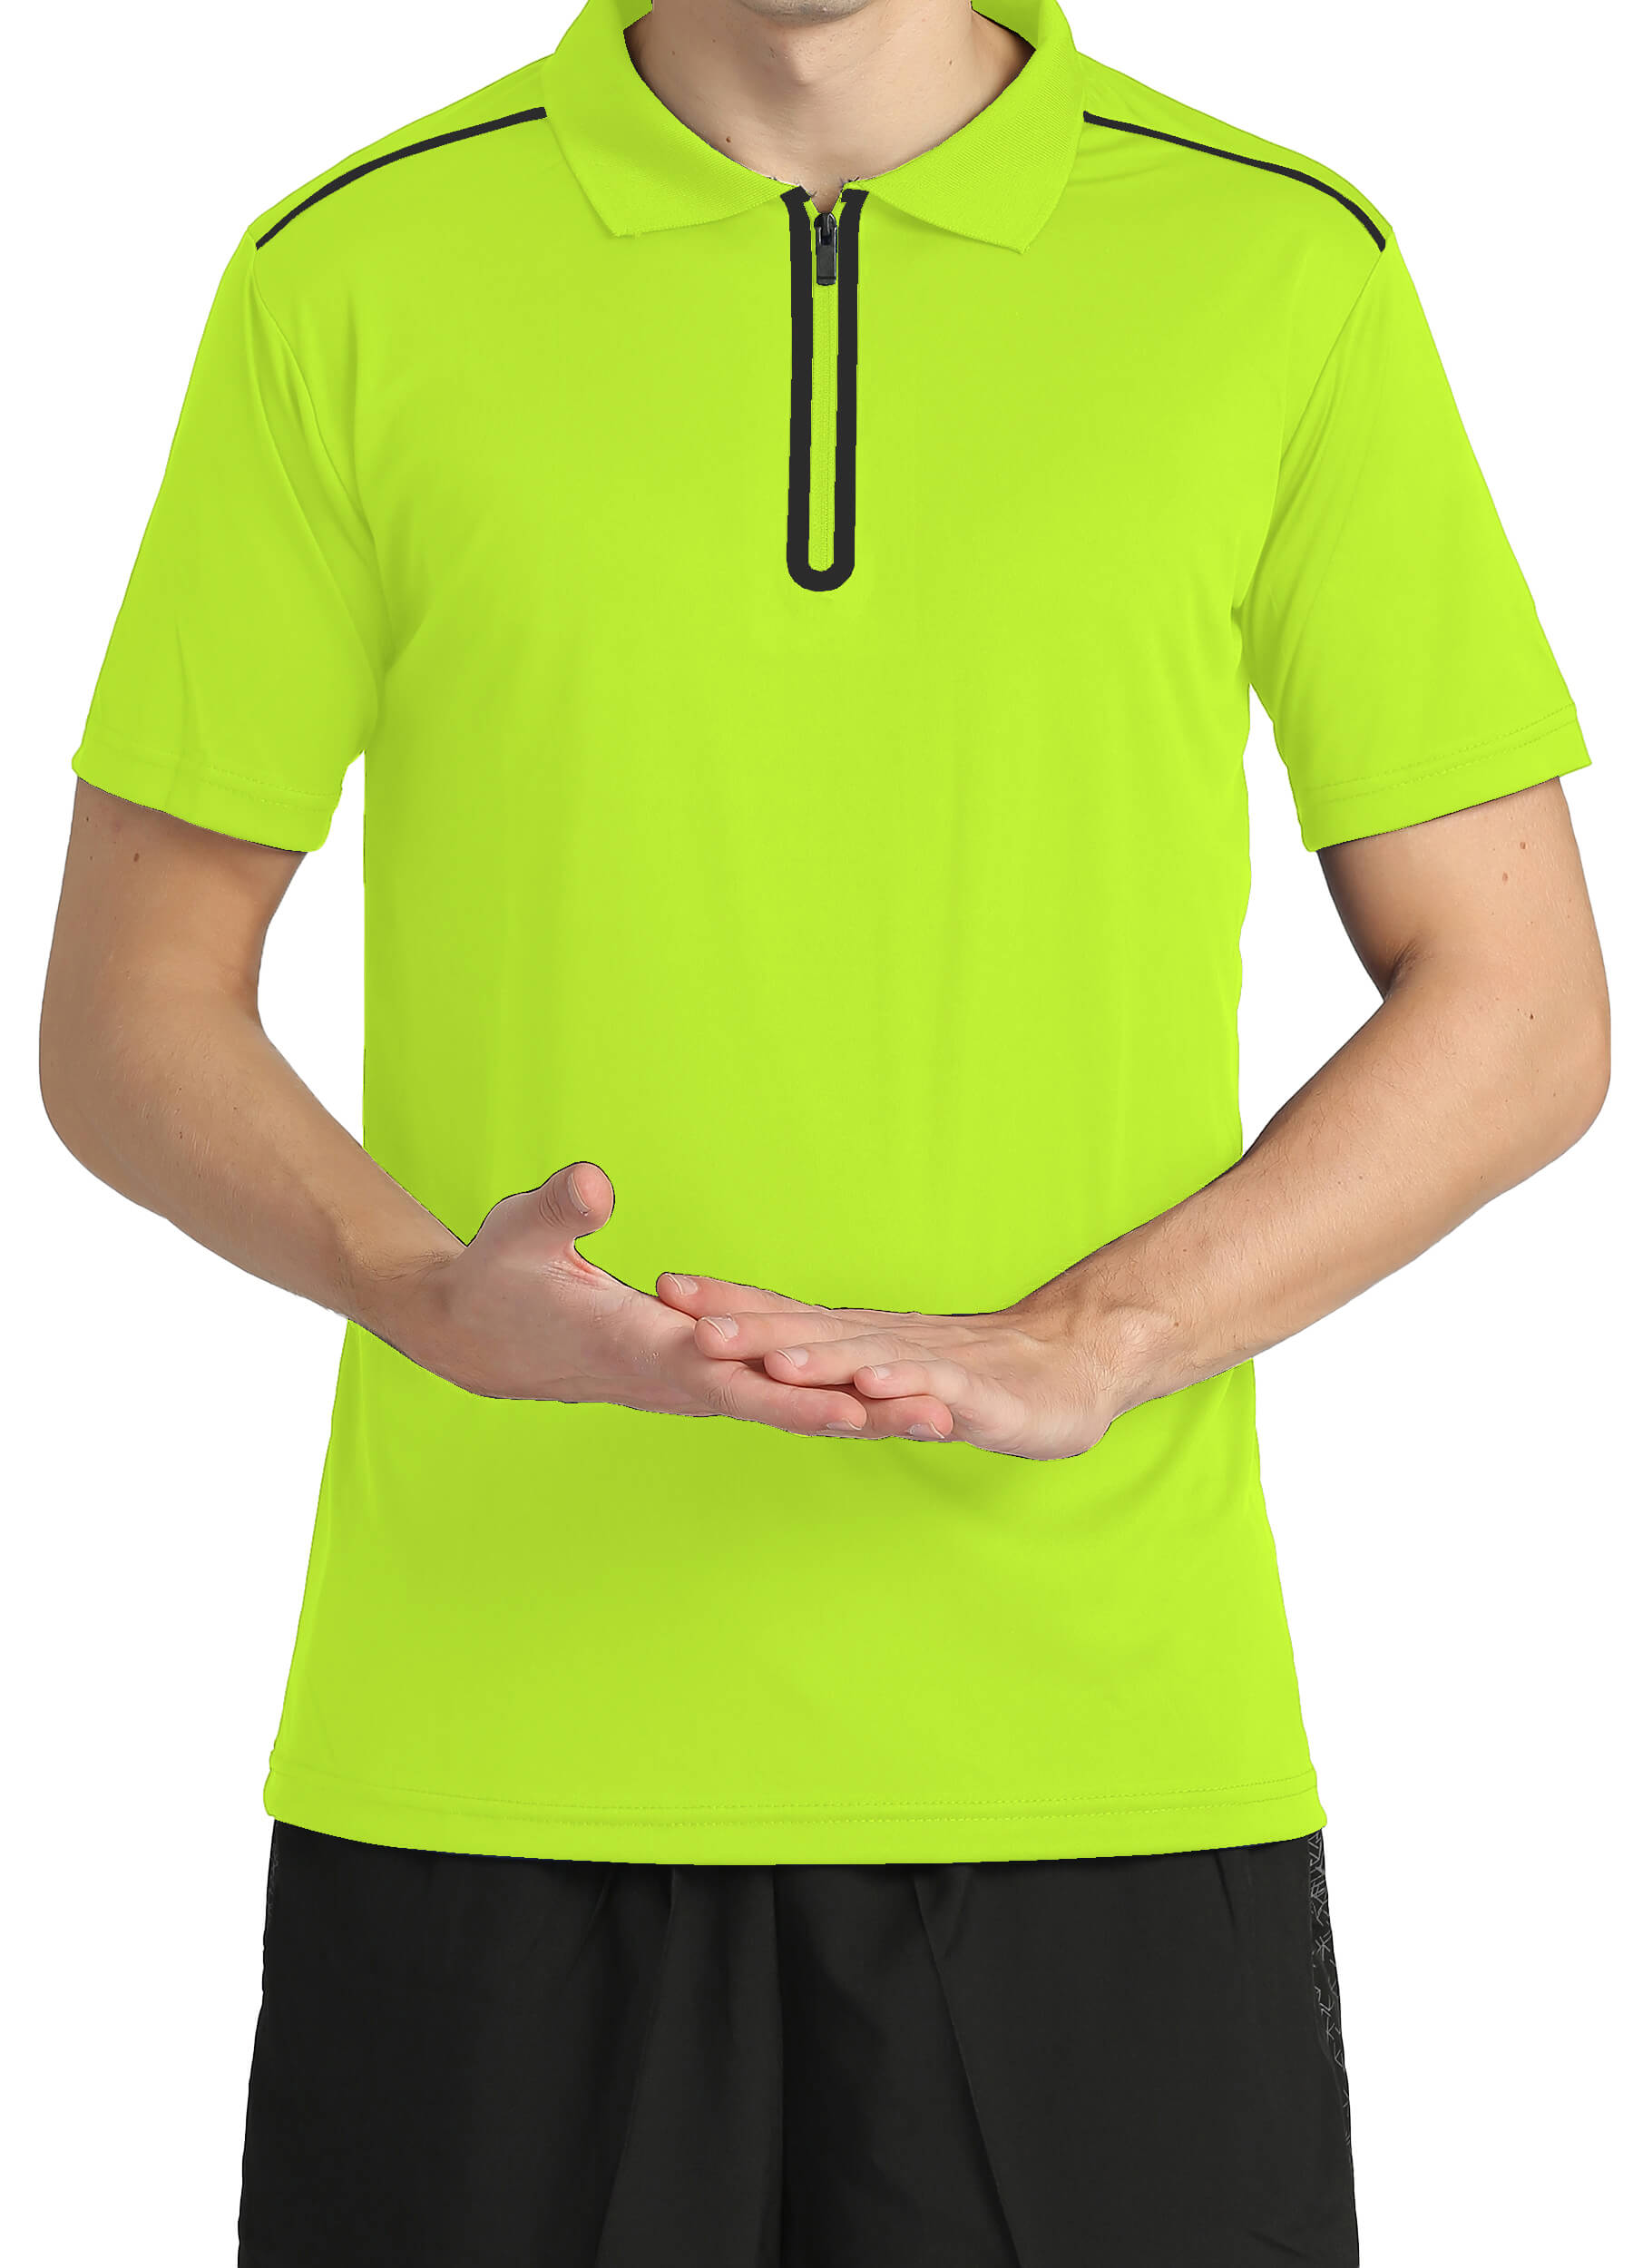 4POSE Men's Light Green Moisture Wicking Quick Dry Golf Workout Polo Shirt (Clearance)